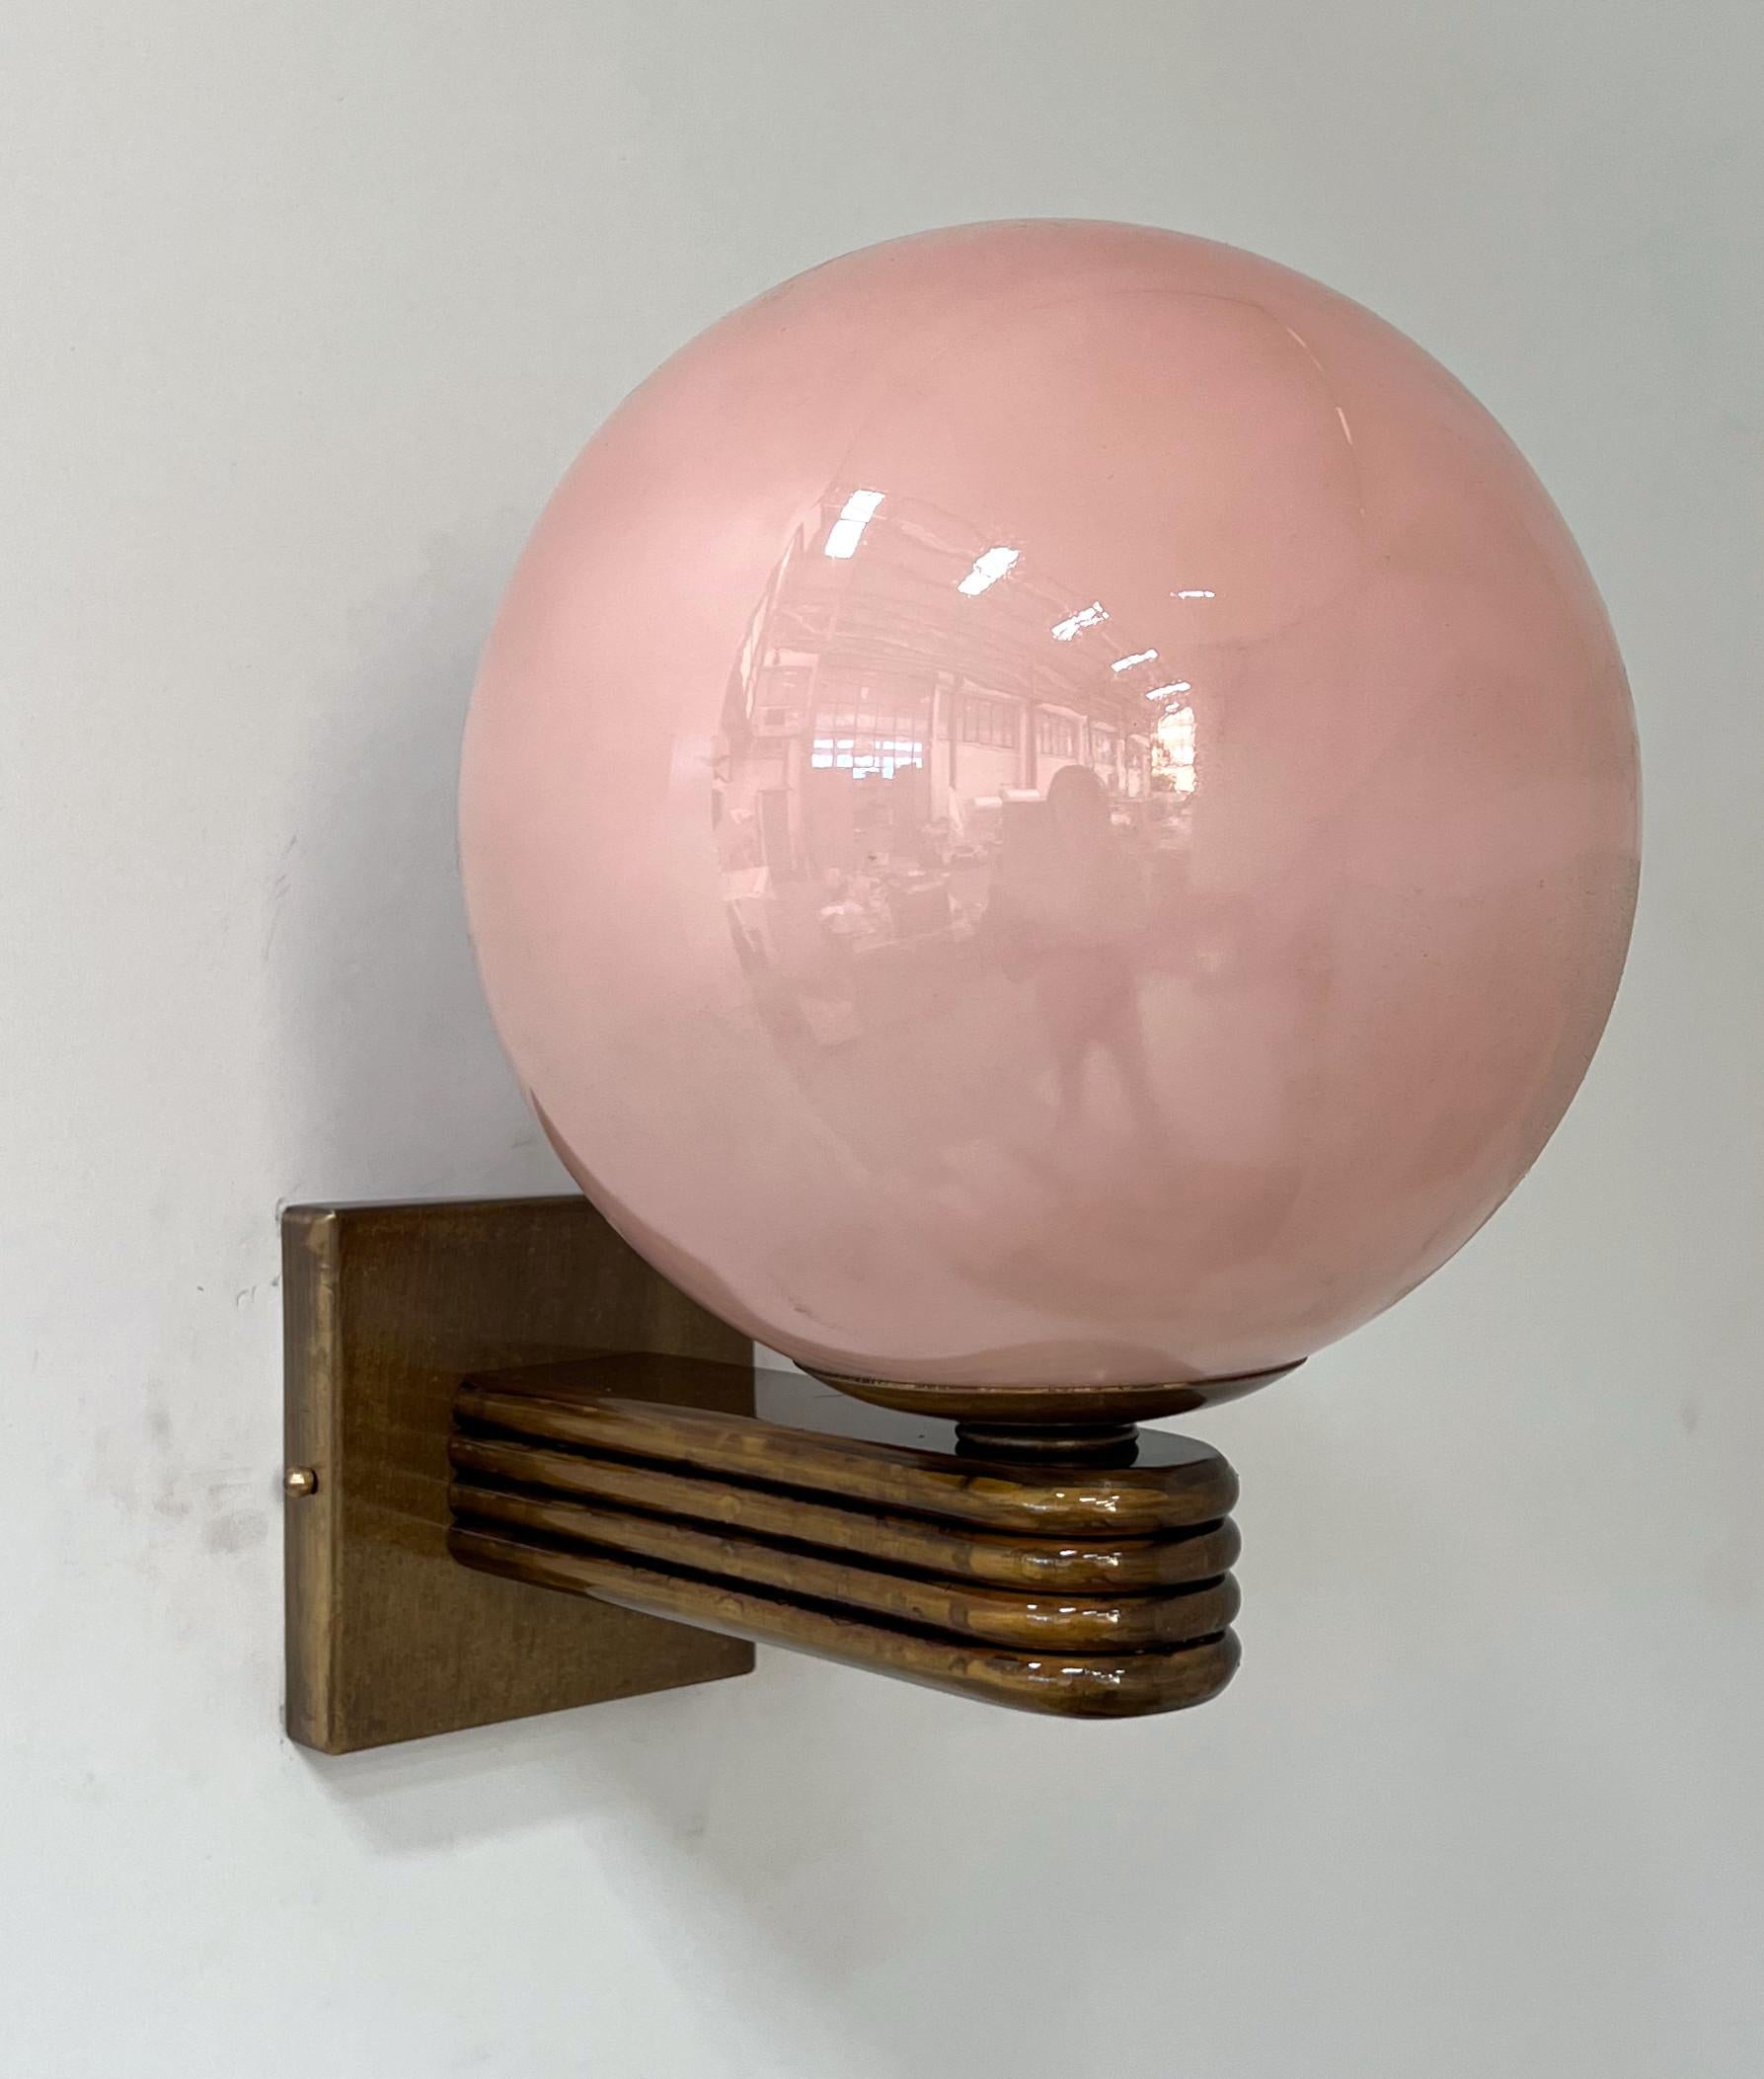 Italian Art Deco style wall light with opaque pink coral Murano glass globe mounted on bronzed finish frame, designed by Fabio Bergomi for Fabio Ltd, made in Italy
1-light / E26 or E27 type / max 60W
Measures: Height 12 inches, width 8 inches,